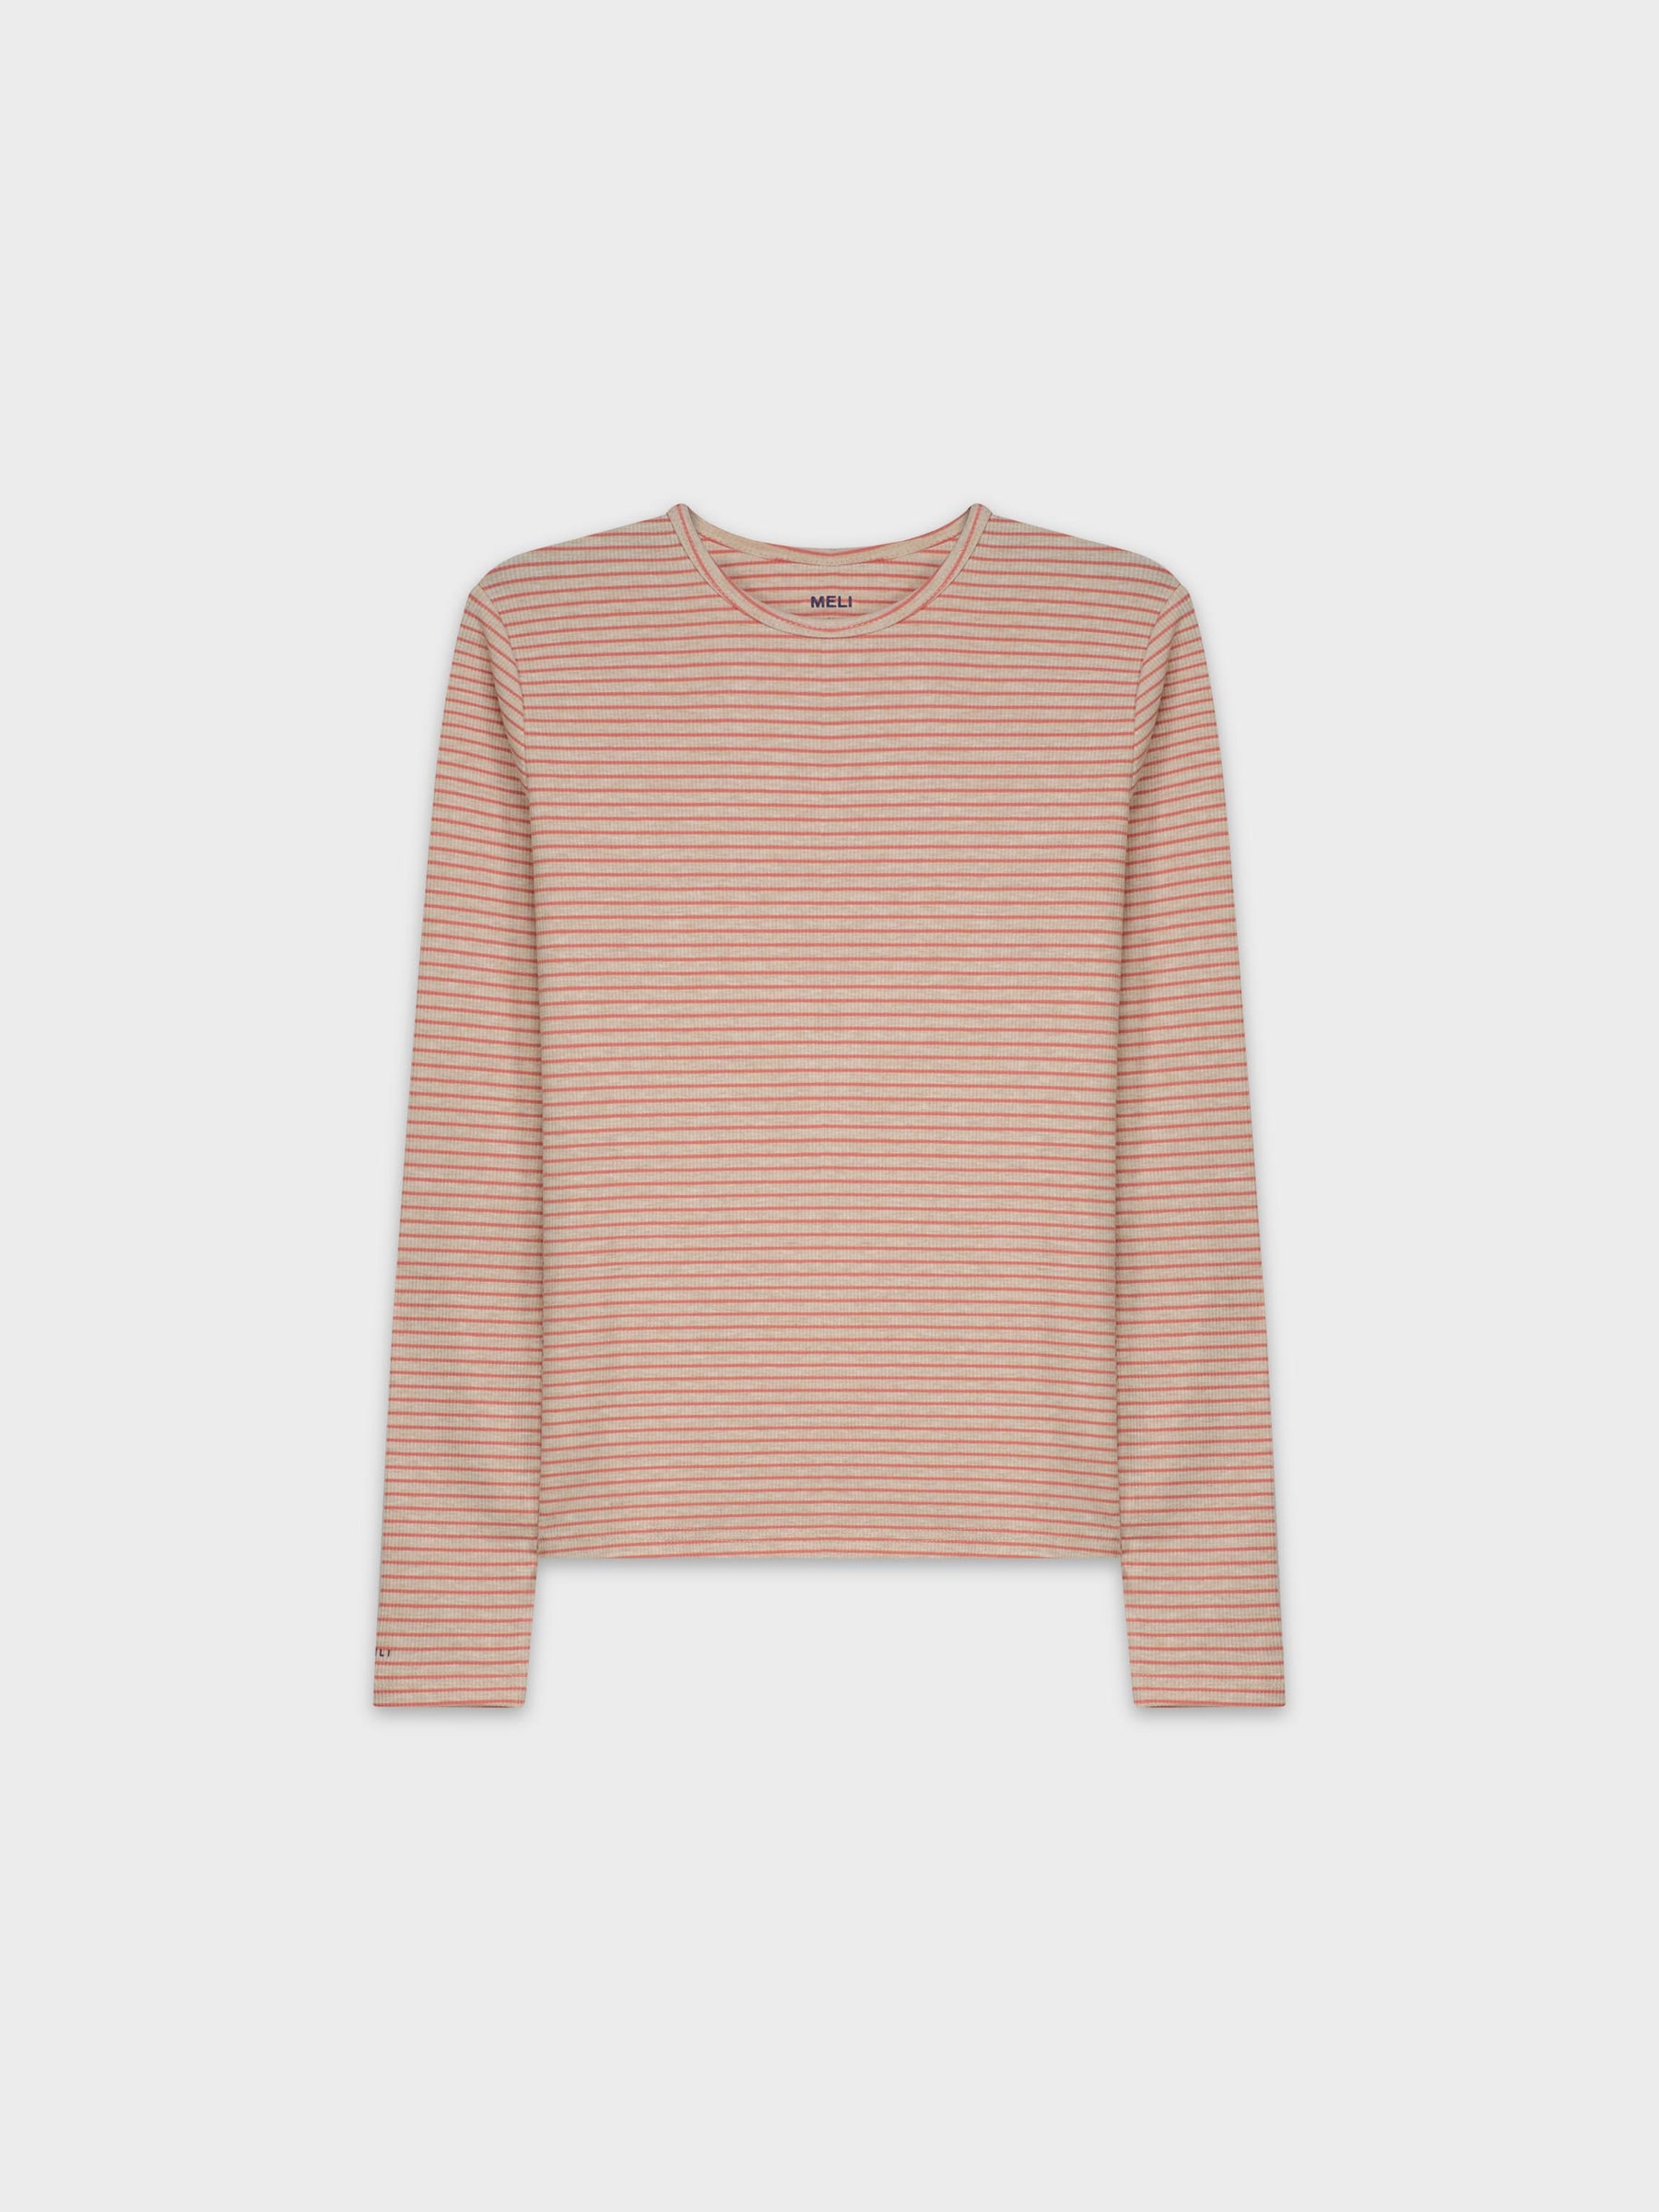 RIBBED STRIPED CREW-HEATHERED TAN/CORAL